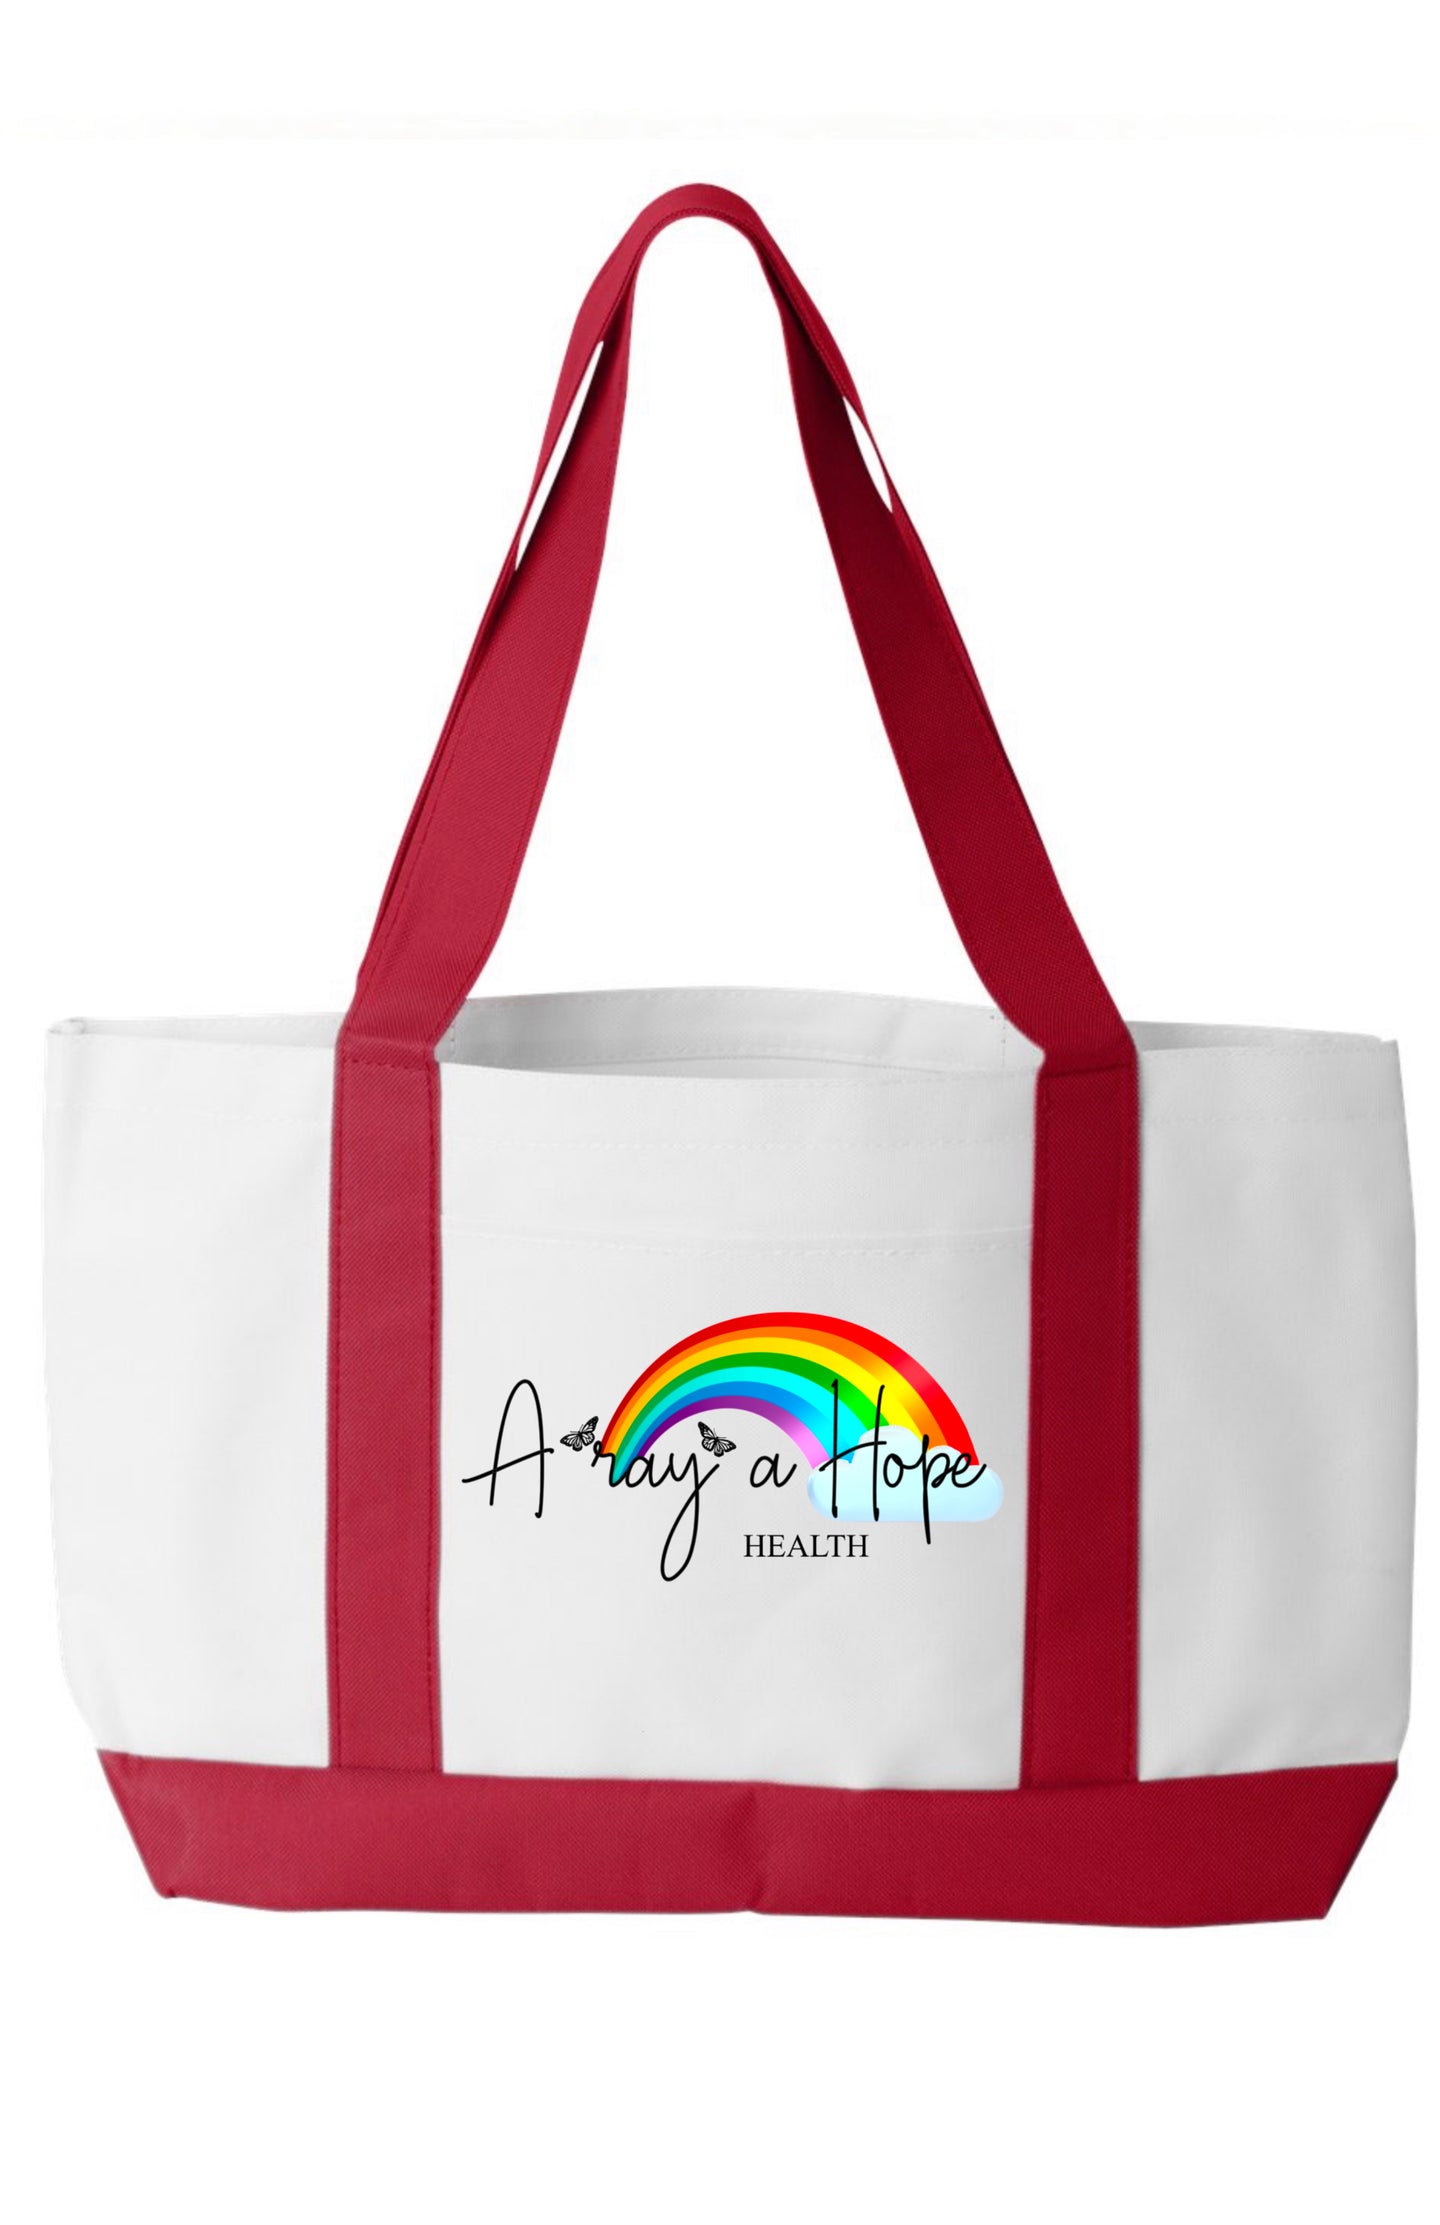 A Ray a Hope Tote